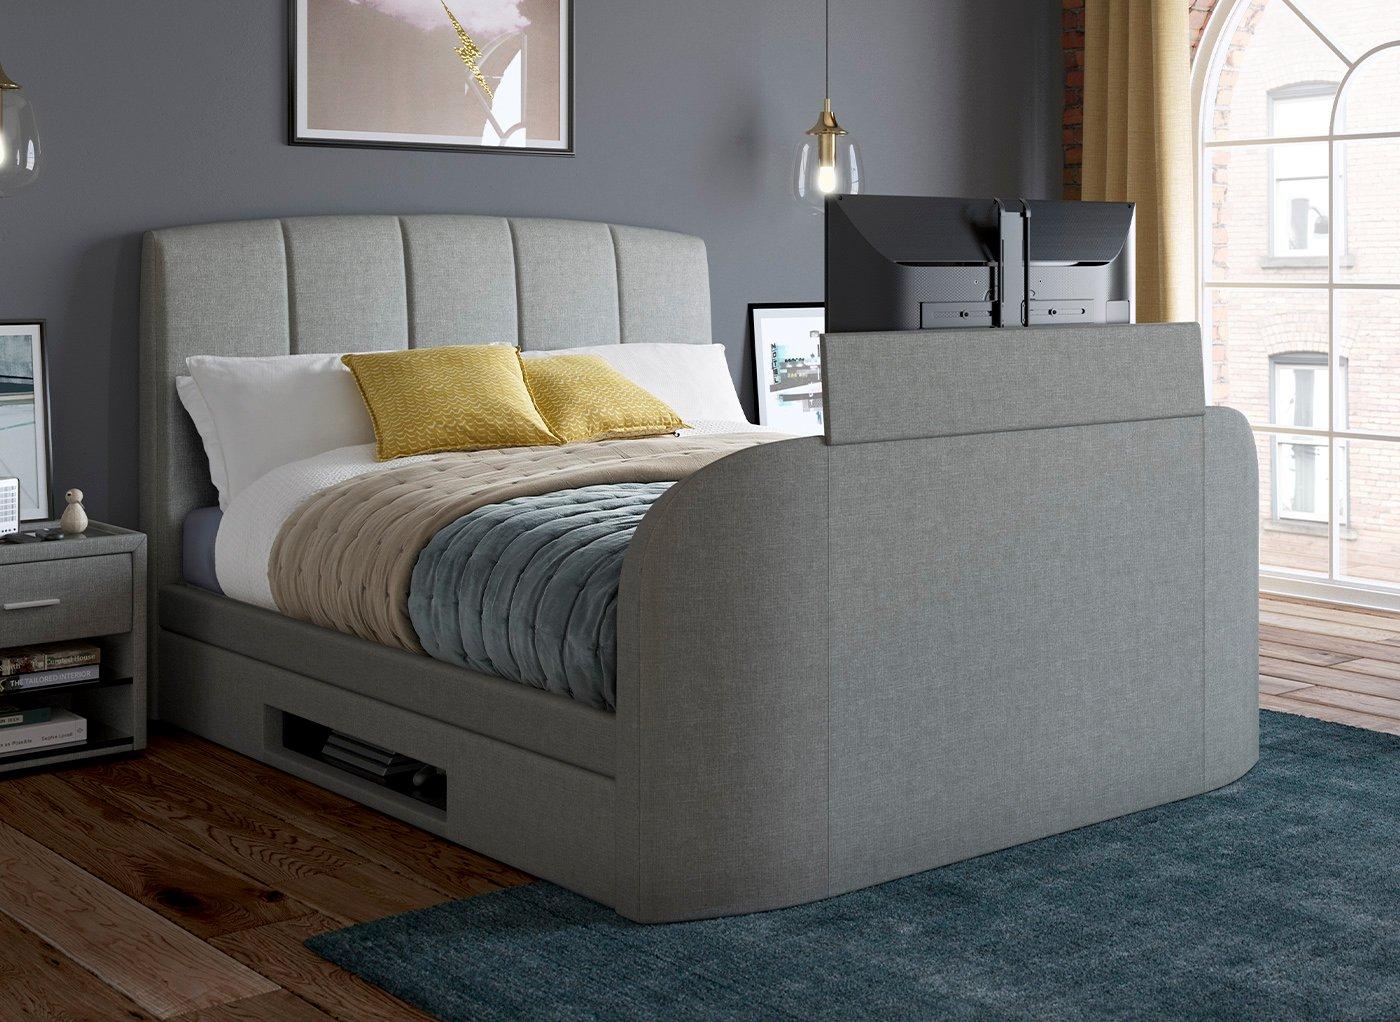 seoul-upholstered-ottoman-bed-frame-with-32--led-tv